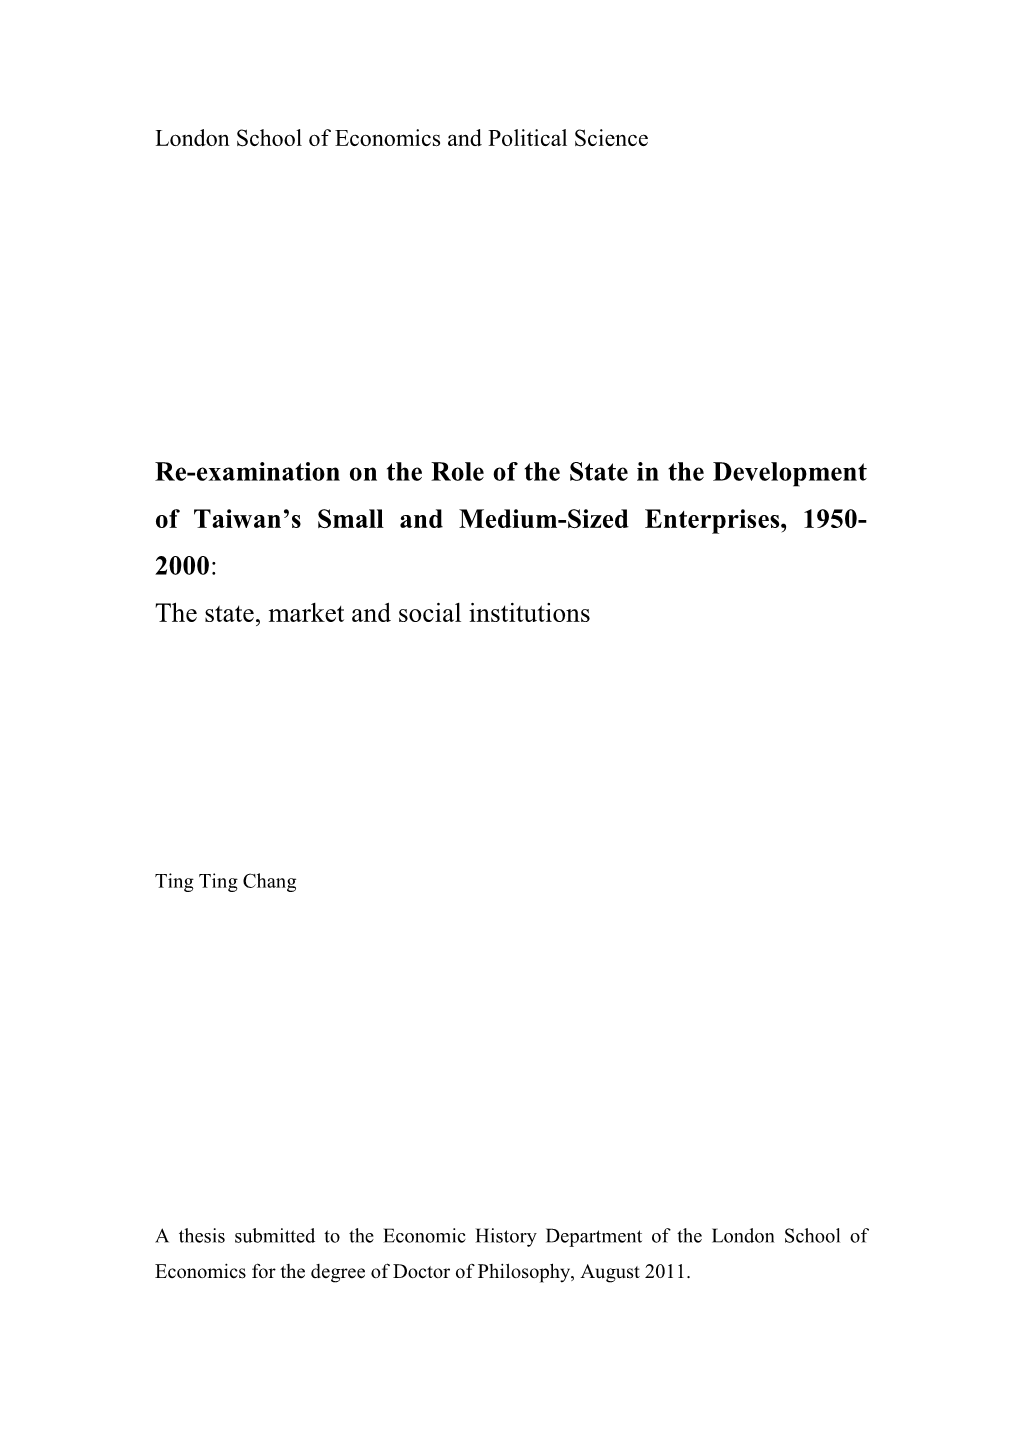 Re-Examination on the Role of the State in the Development of Taiwan's Small and Medium-Sized Enterprises, 1950- 2000: the St